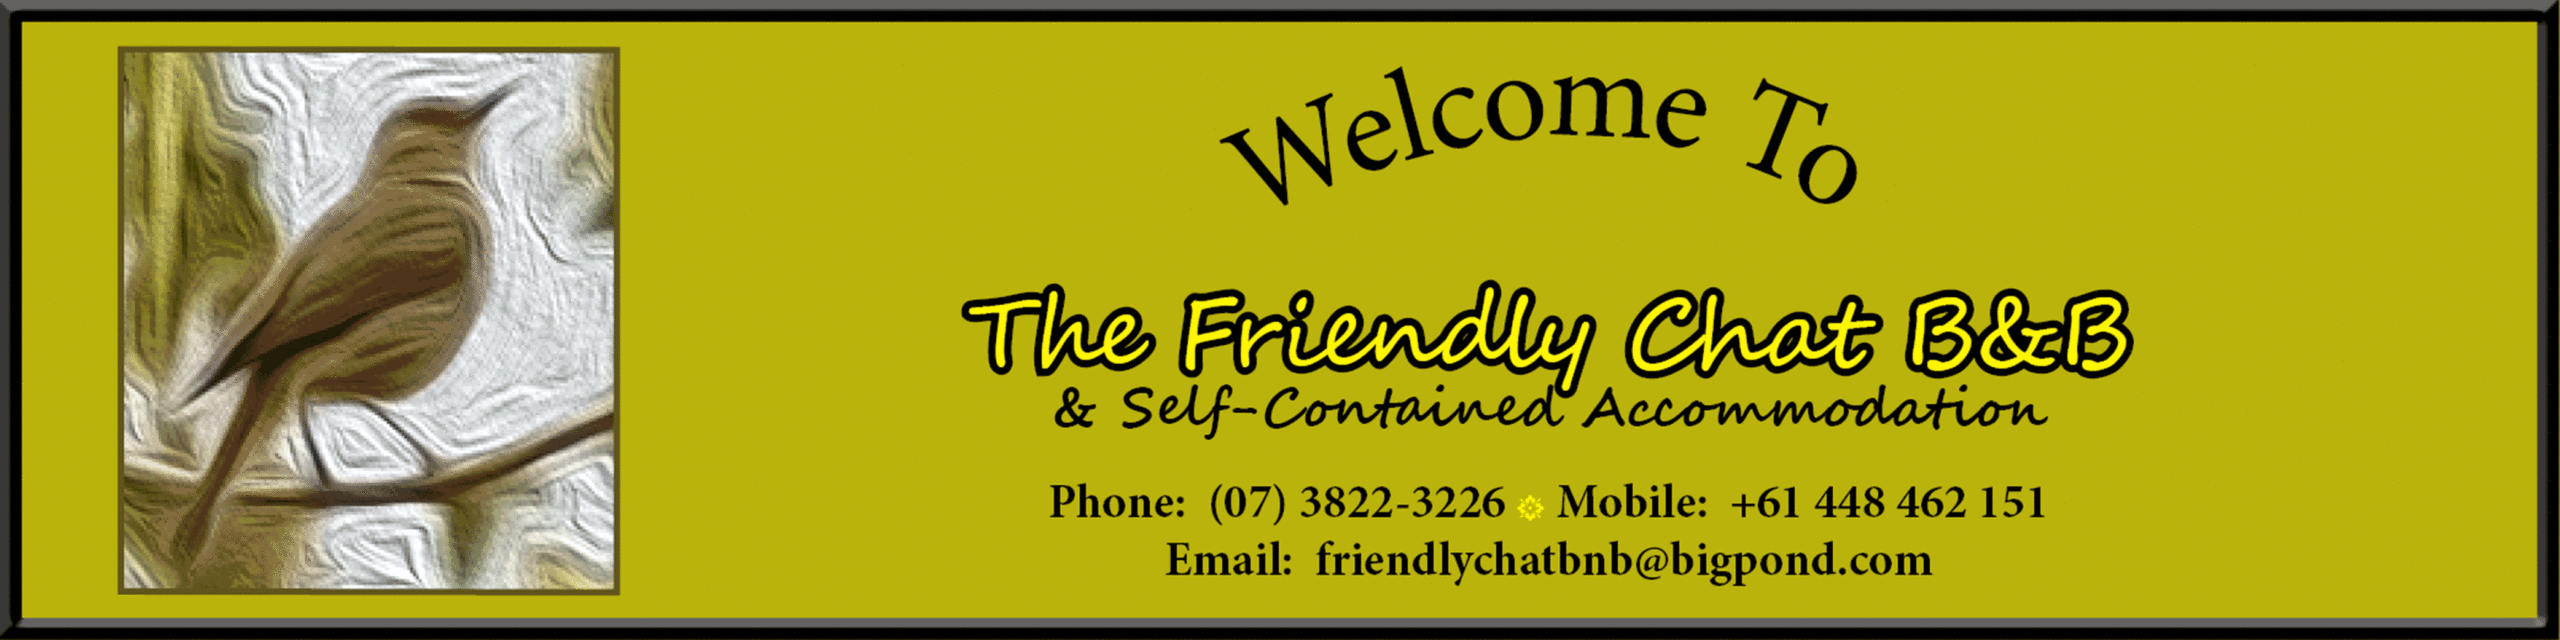 The Friendly Chat Bed and Breakfast